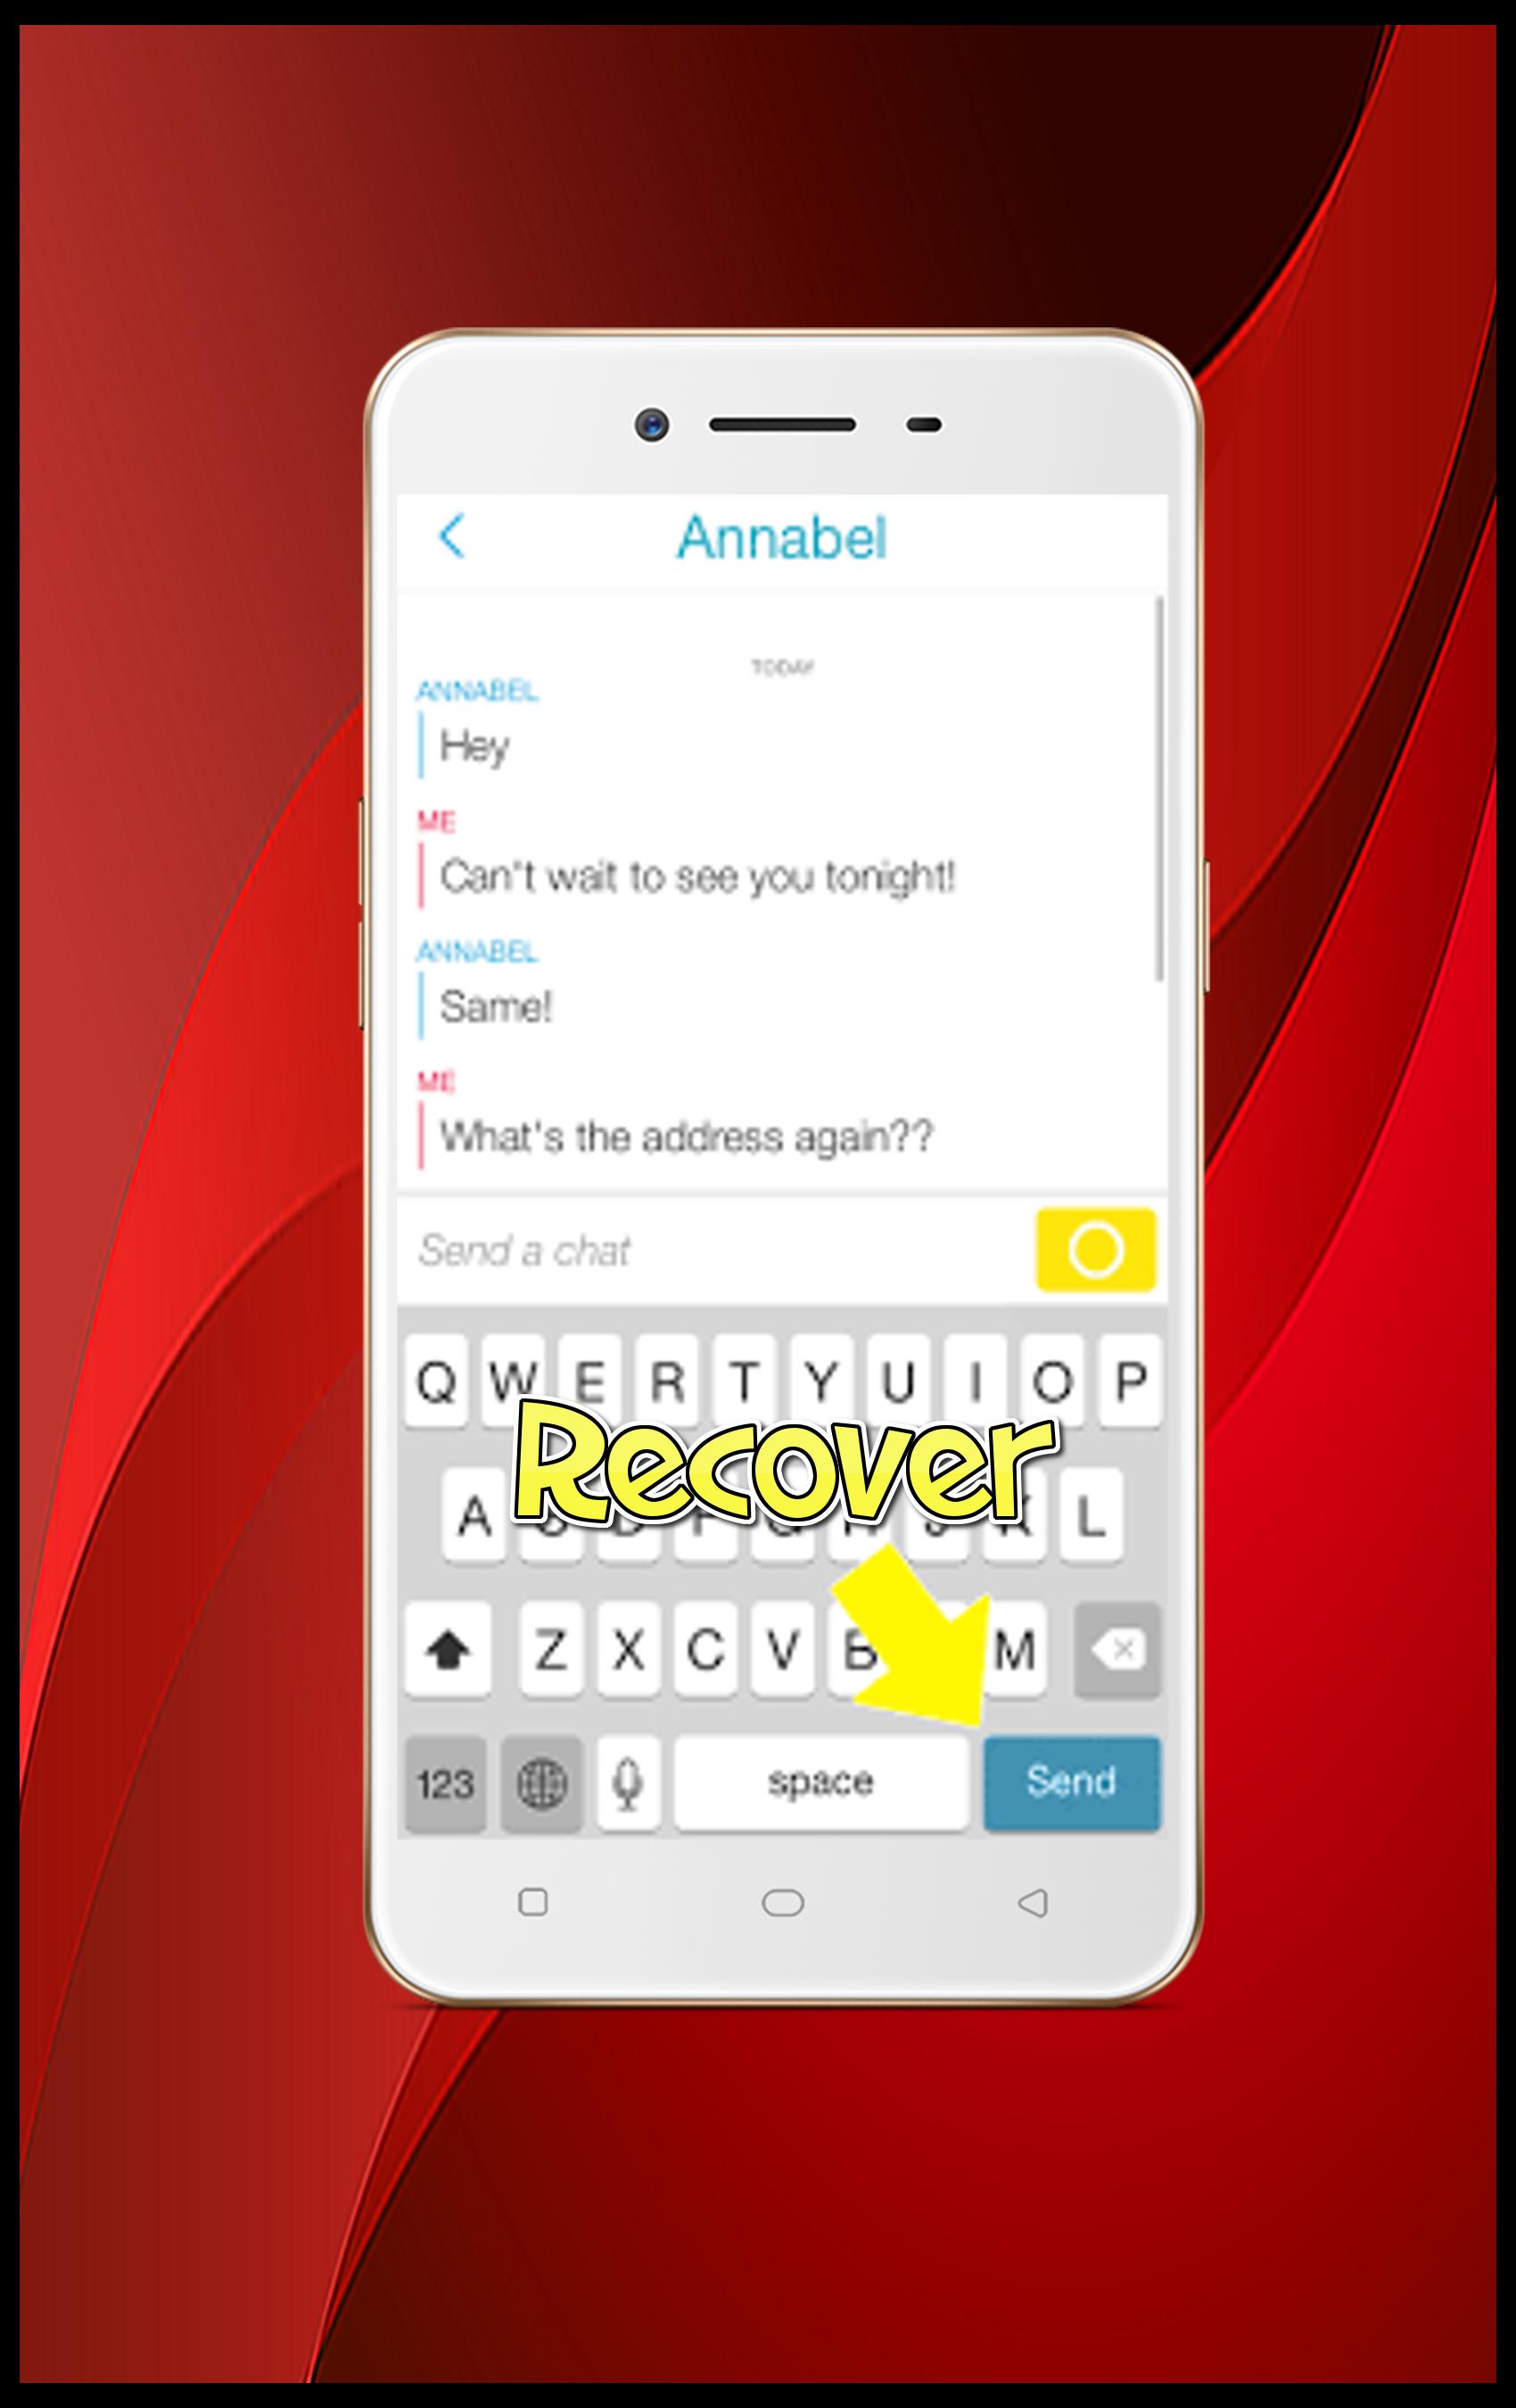 Recover - Snapchat Messages for Android - APK Download